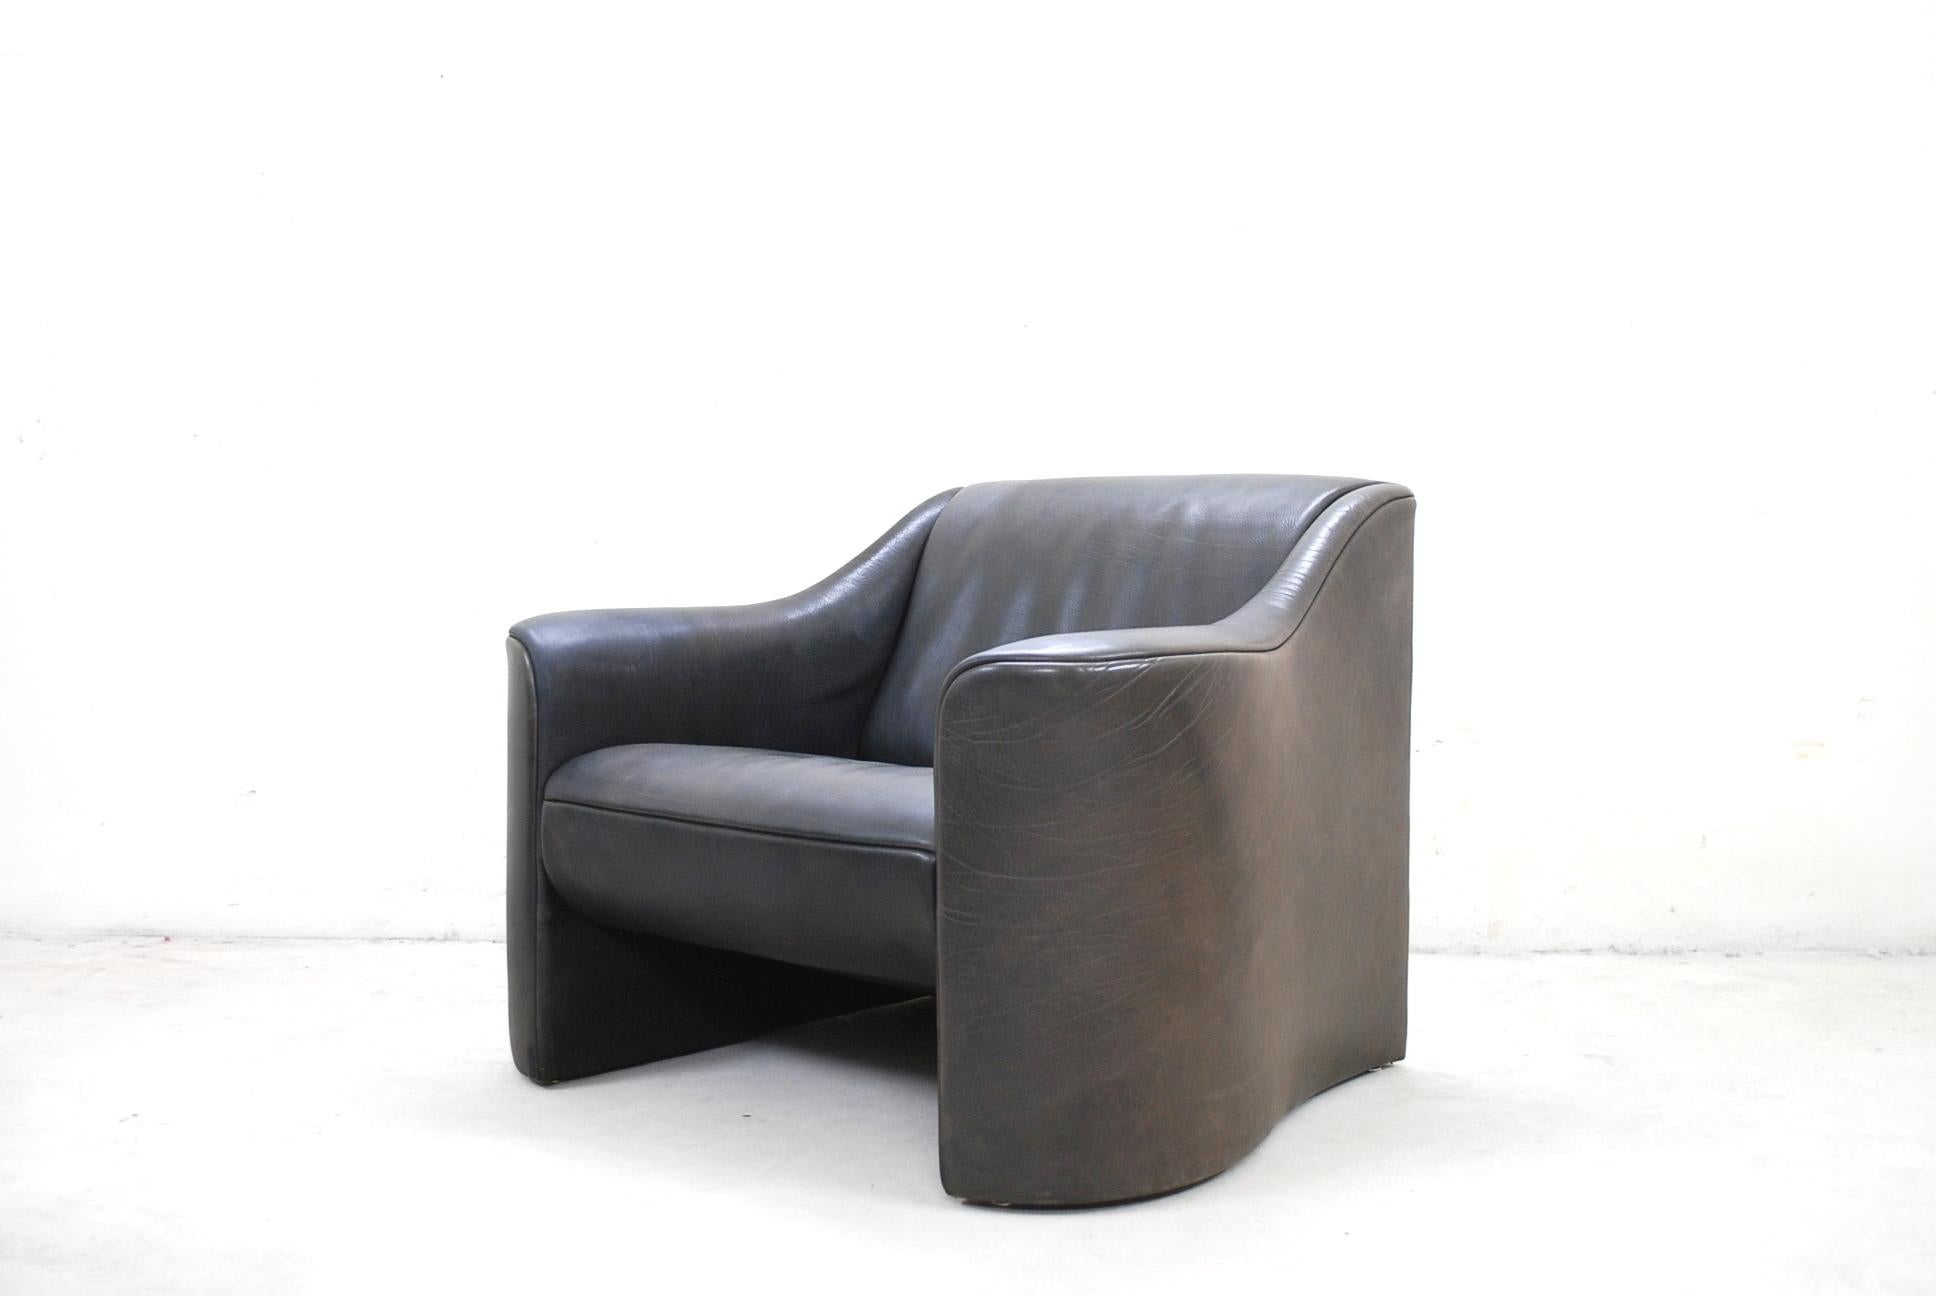 This armchair model esquire was designed by Luigi Massoni & Giorgio Cazzaniga for Matteo Grassi.
It is upholstered in thick dark brown neck leather. With patina on the armrests.
The shape is like a sculpture and beautiful curved.
Great Italian